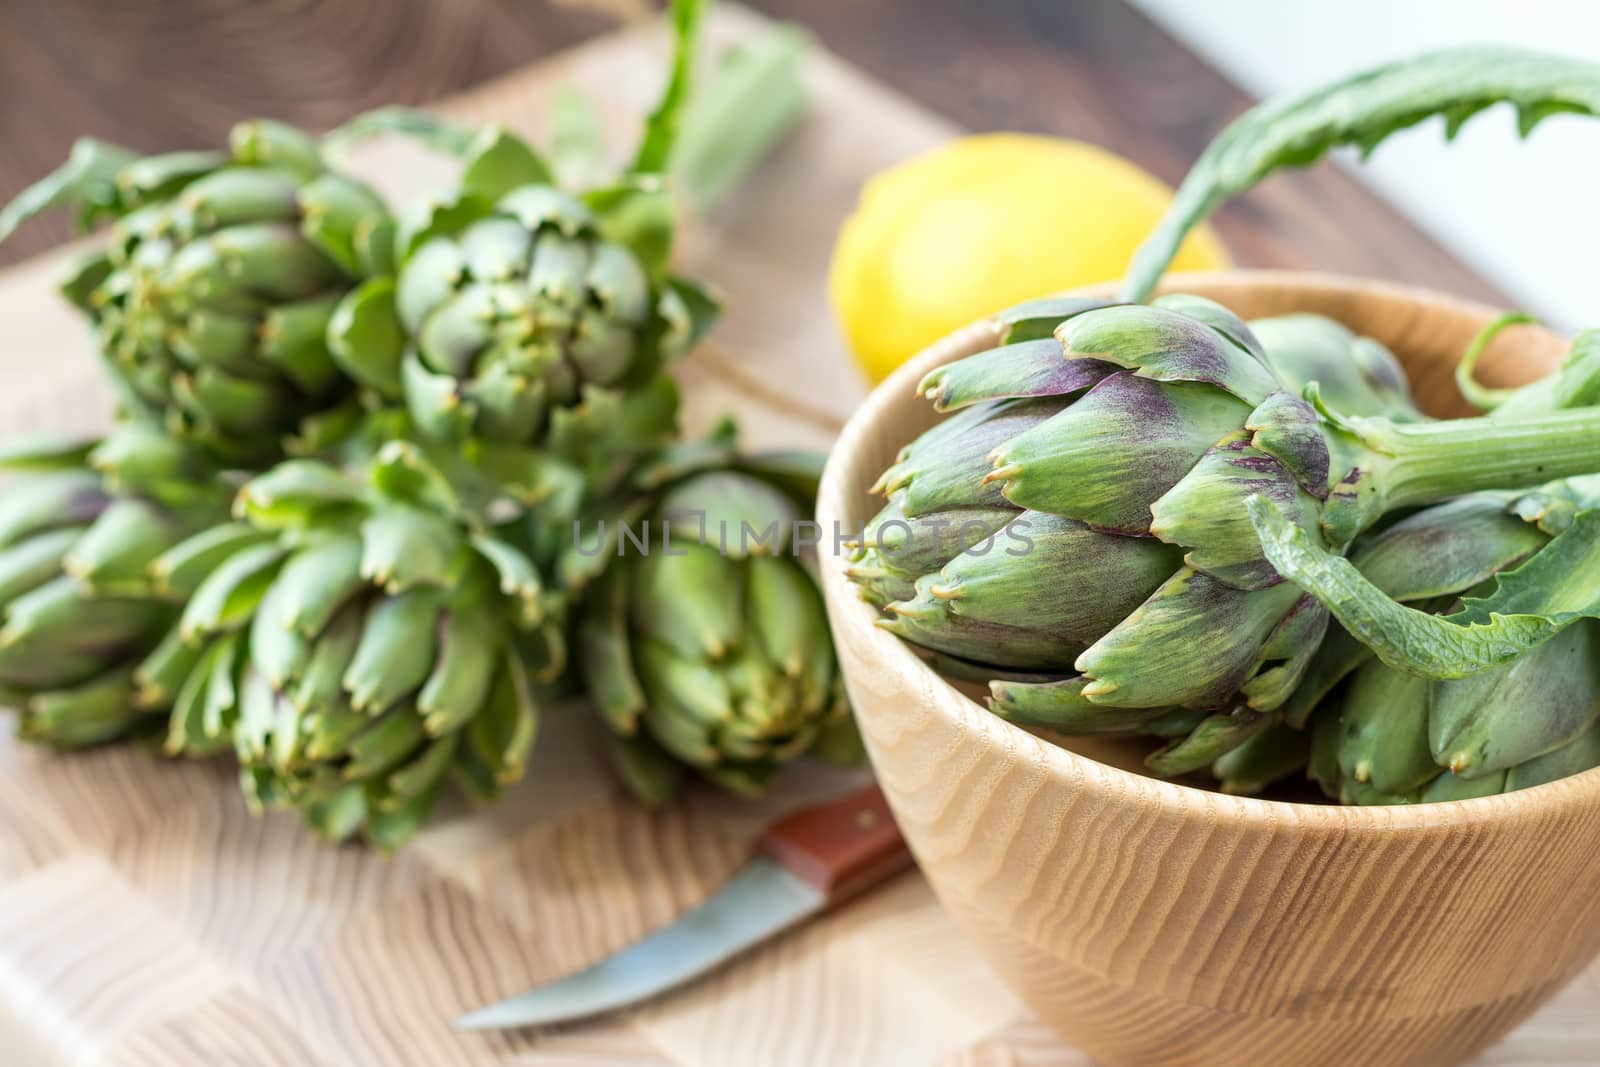 Two artichoke bouquets on kitchen table among some kitchen items by ArtSvitlyna